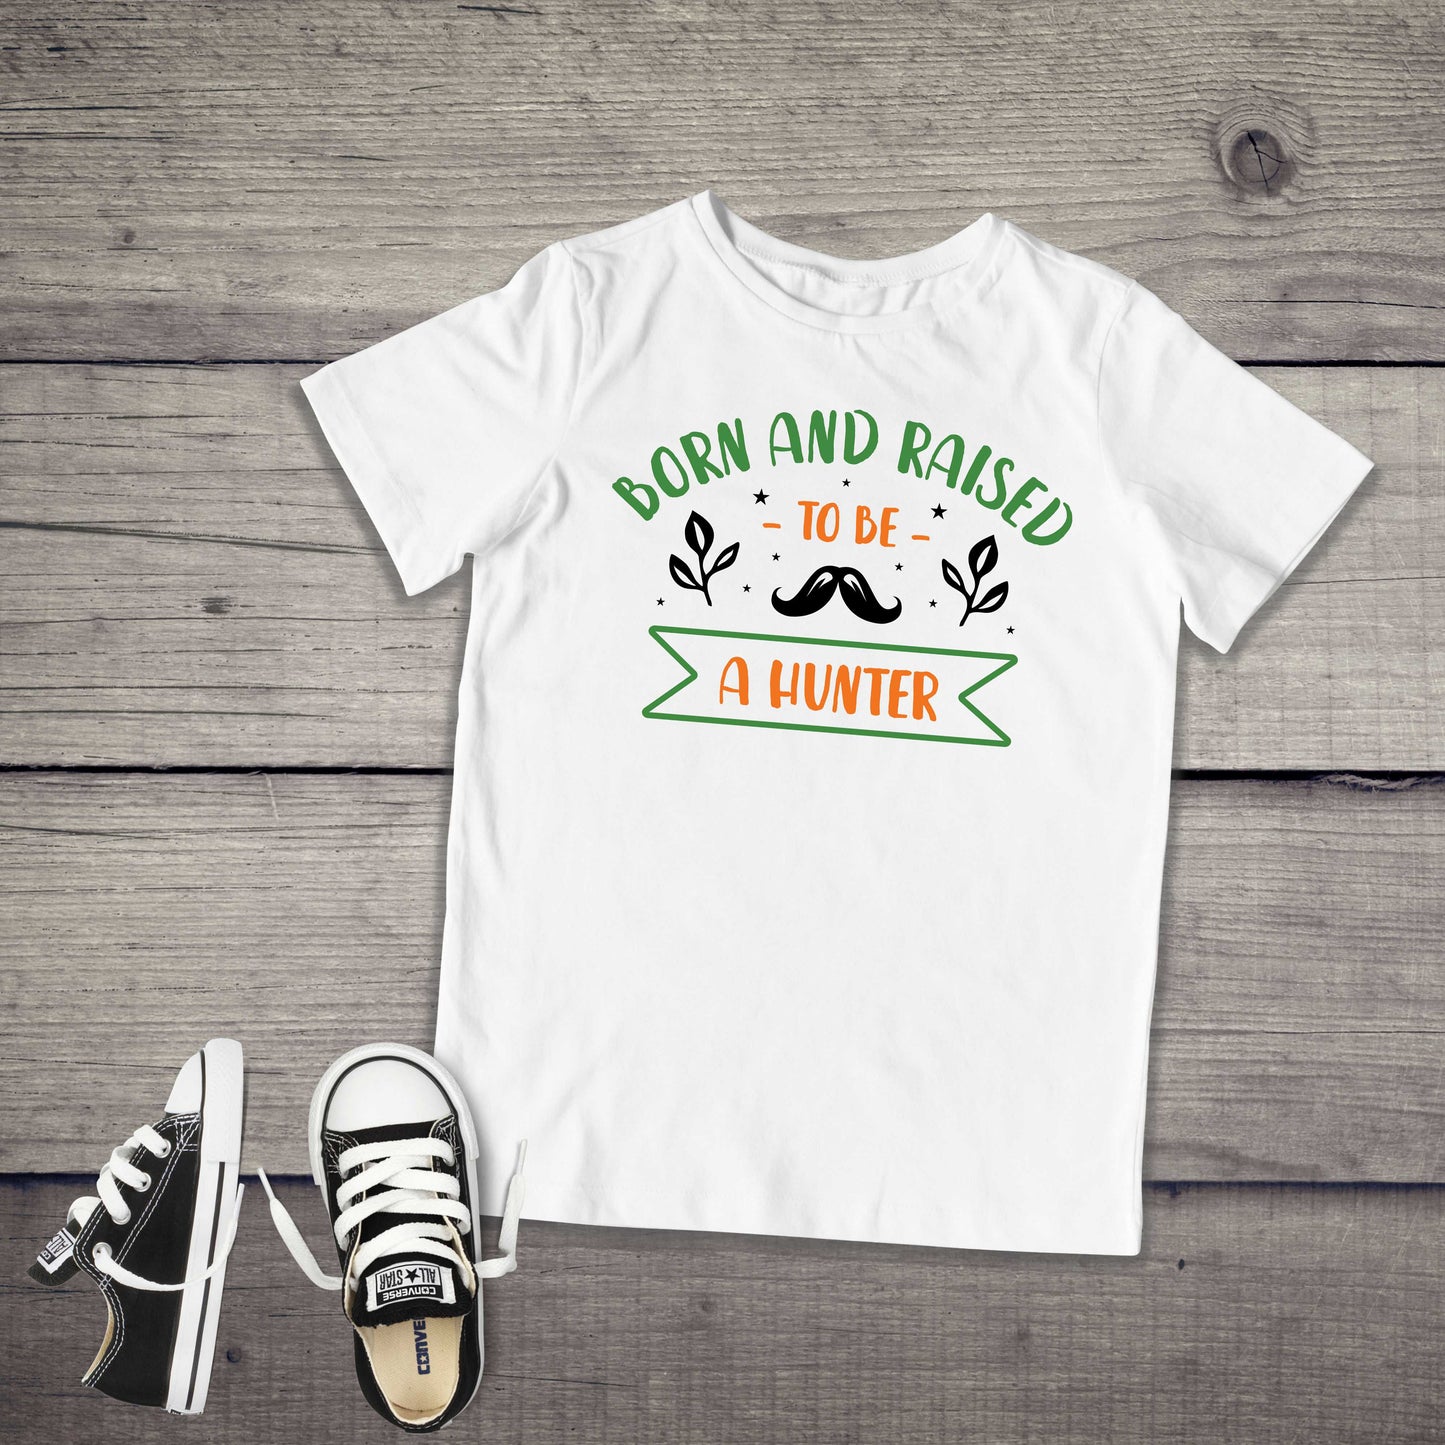 Born And Raised to be a Hunter Infant or Youth Shirt or Bodysuit - Future Hunter - Daddy&#39;s Hunting Buddy - Deer Hunting - Hunting Dad